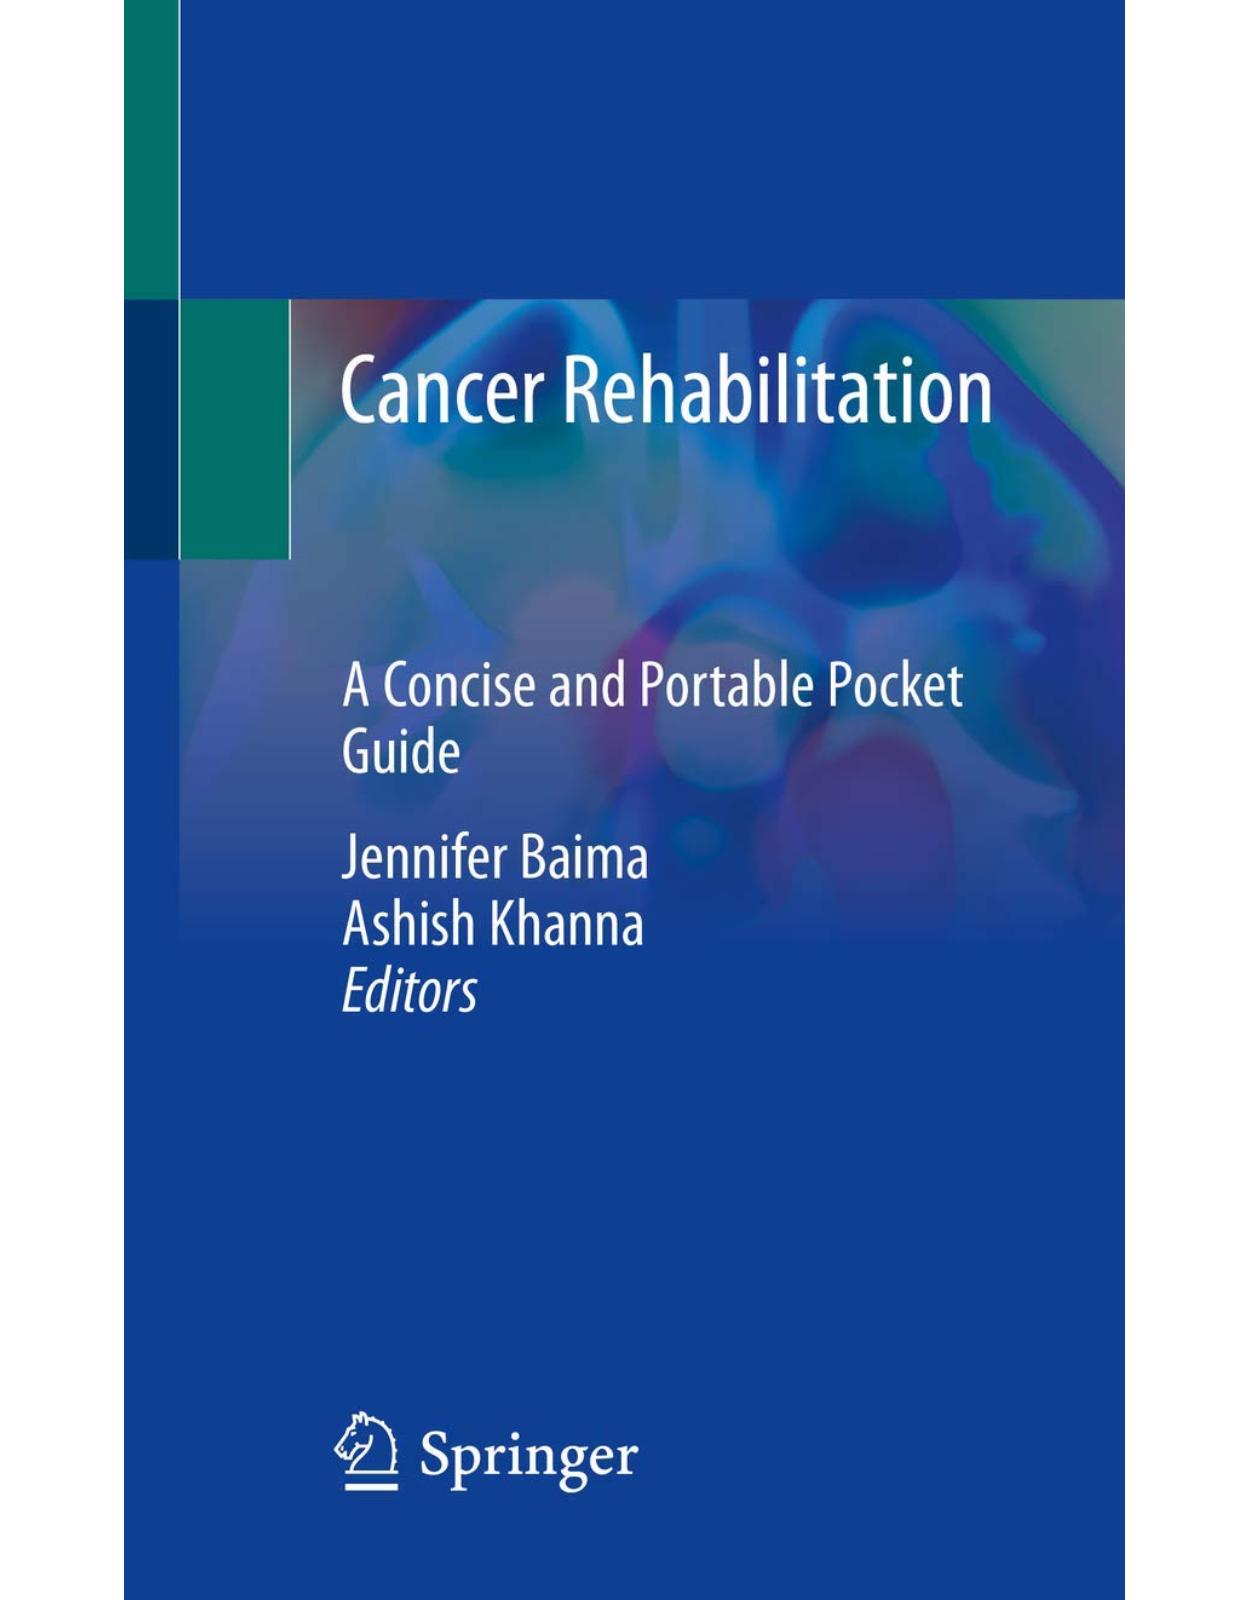 Cancer Rehabilitation. A Concise and Portable Pocket Guide